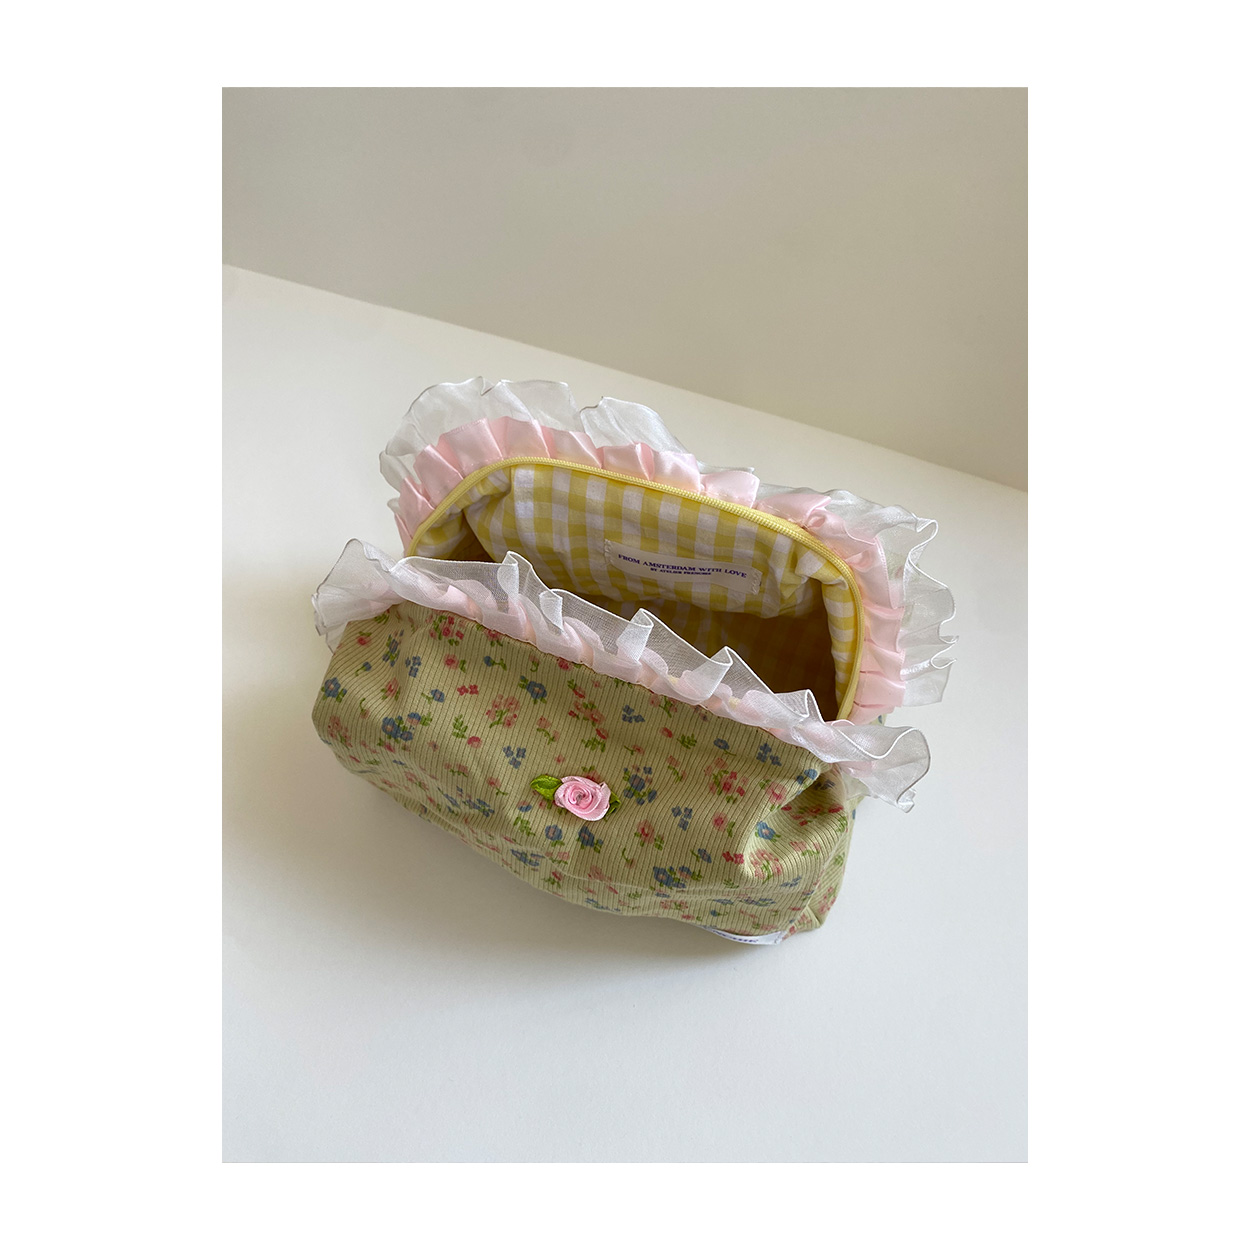 Floral Mimosa lime bag